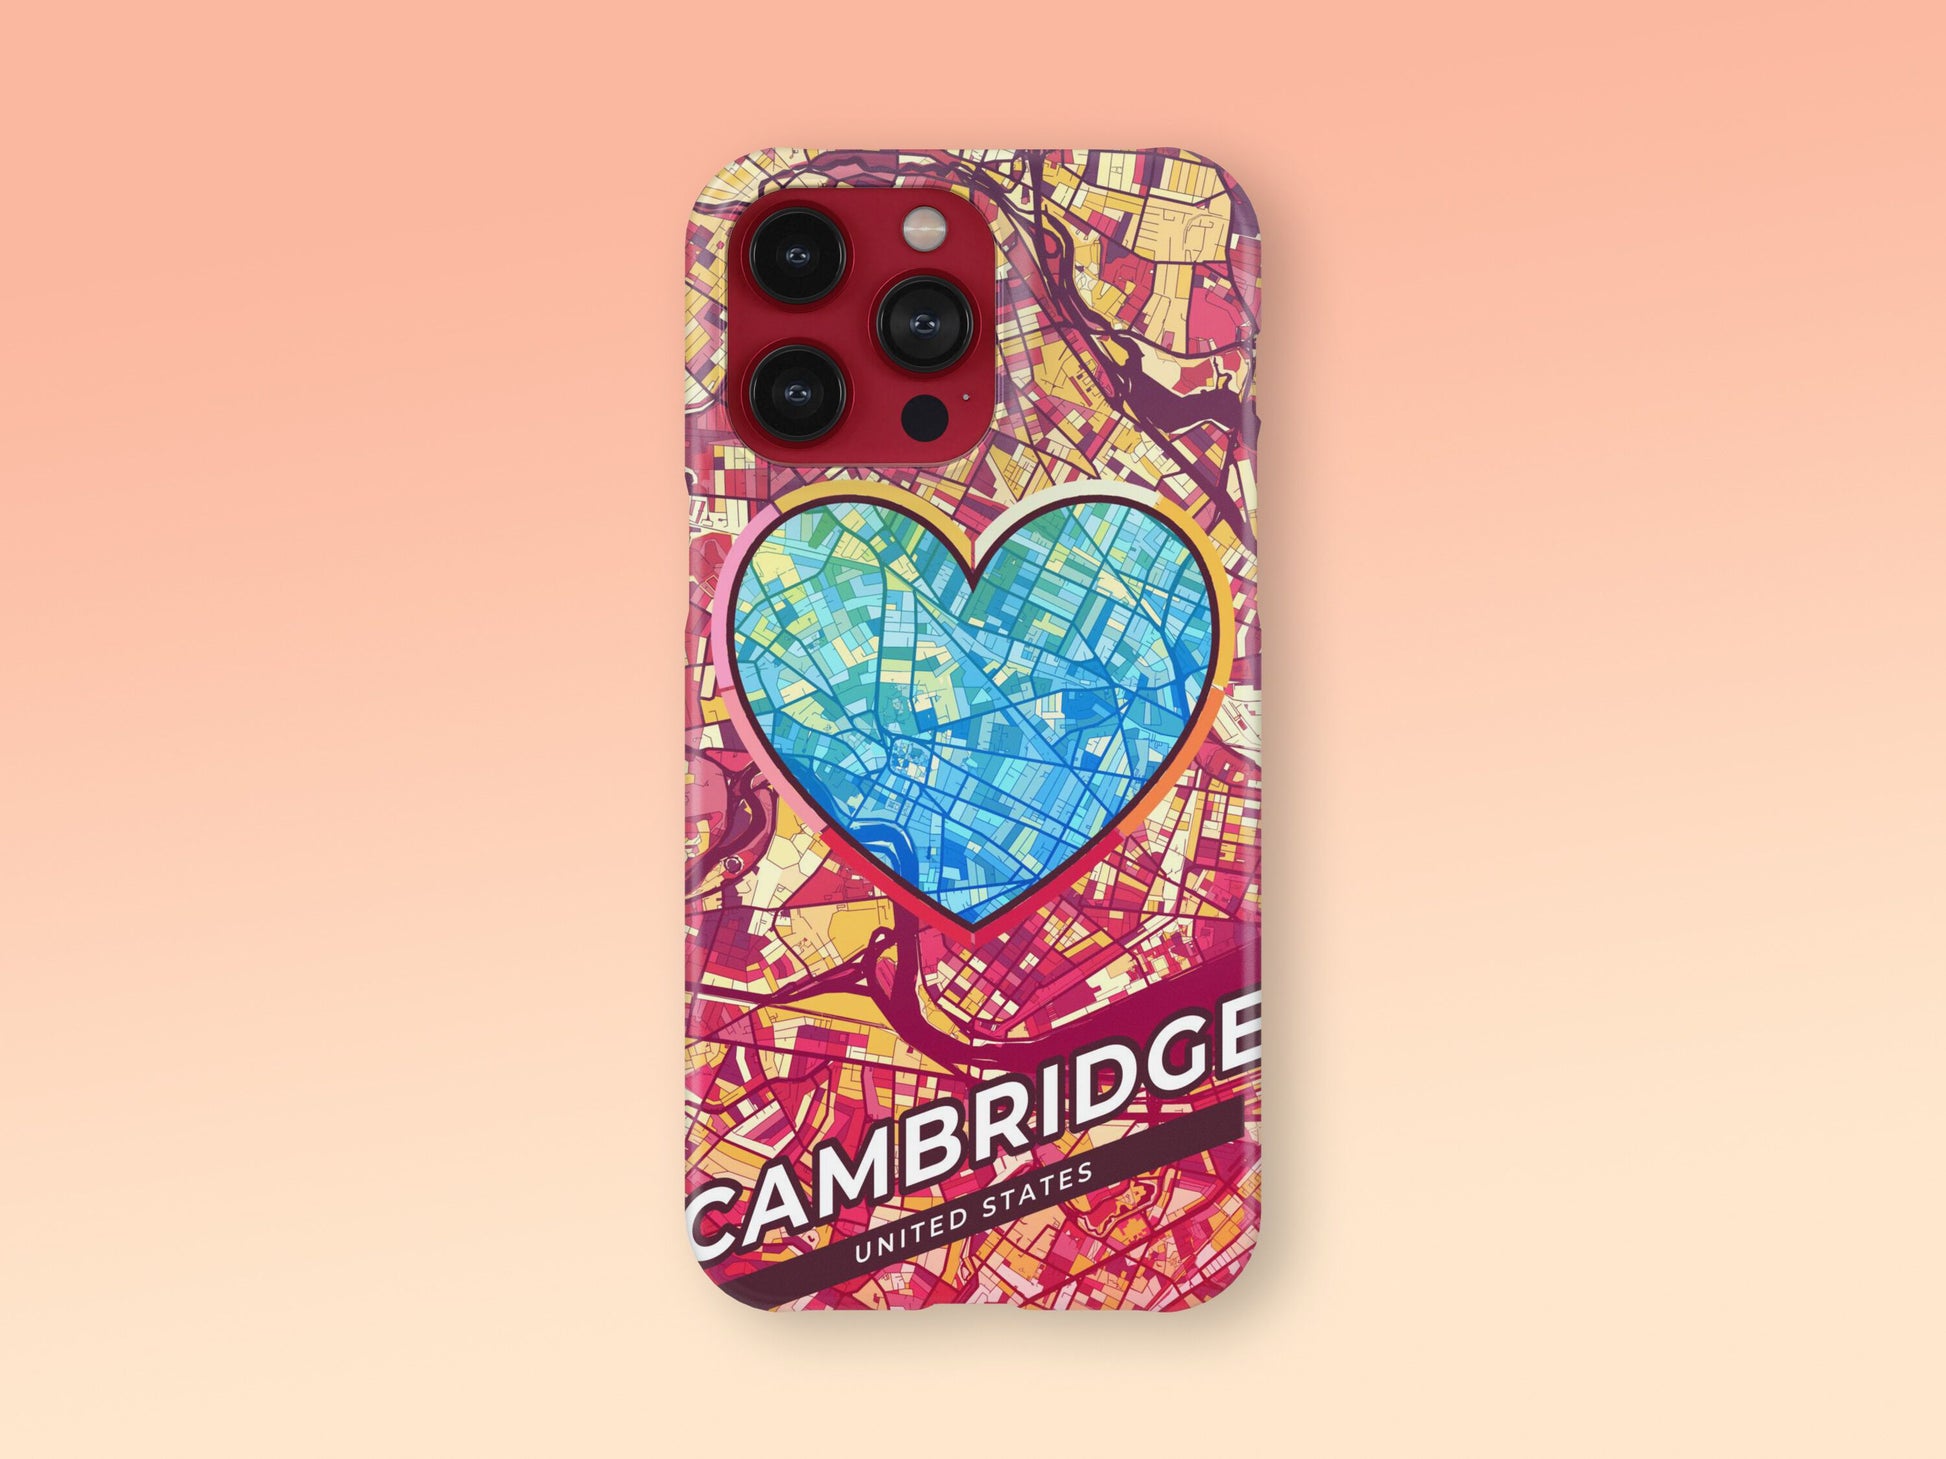 Cambridge Massachusetts slim phone case with colorful icon. Birthday, wedding or housewarming gift. Couple match cases. 2